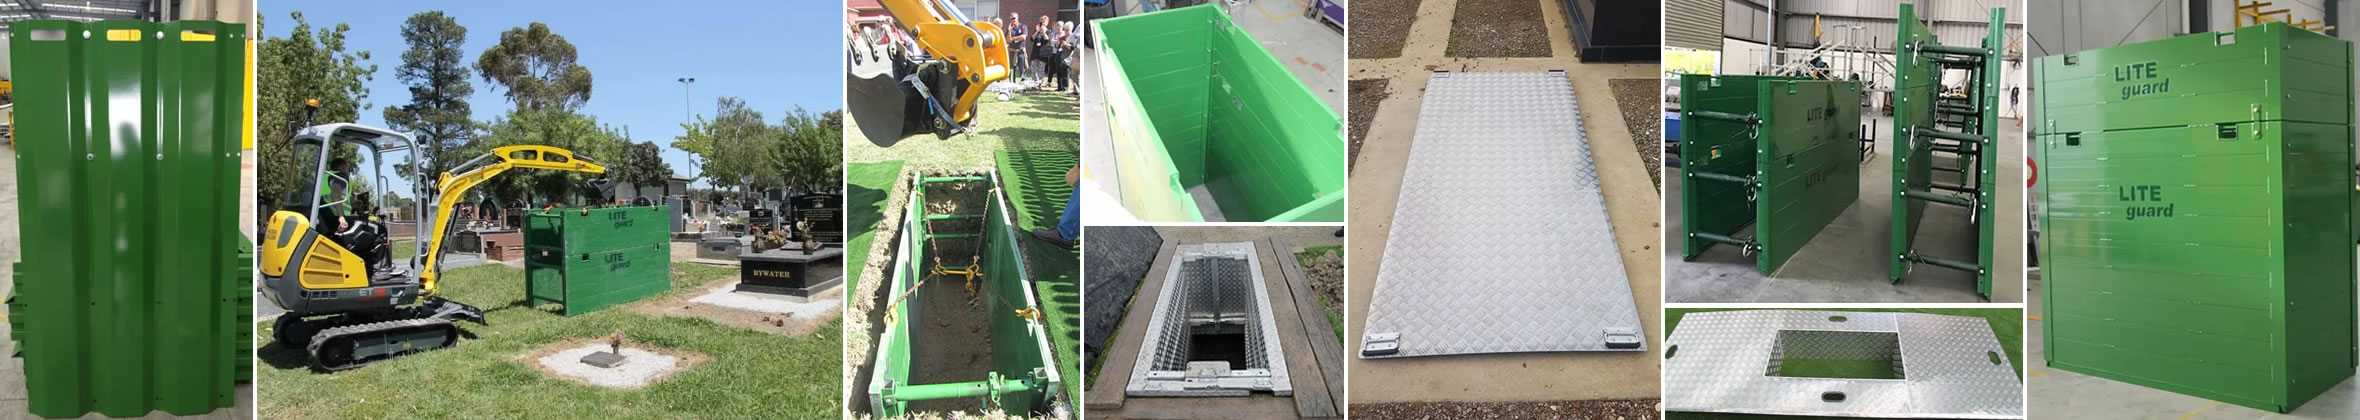 LITE guard Grave Shoring System